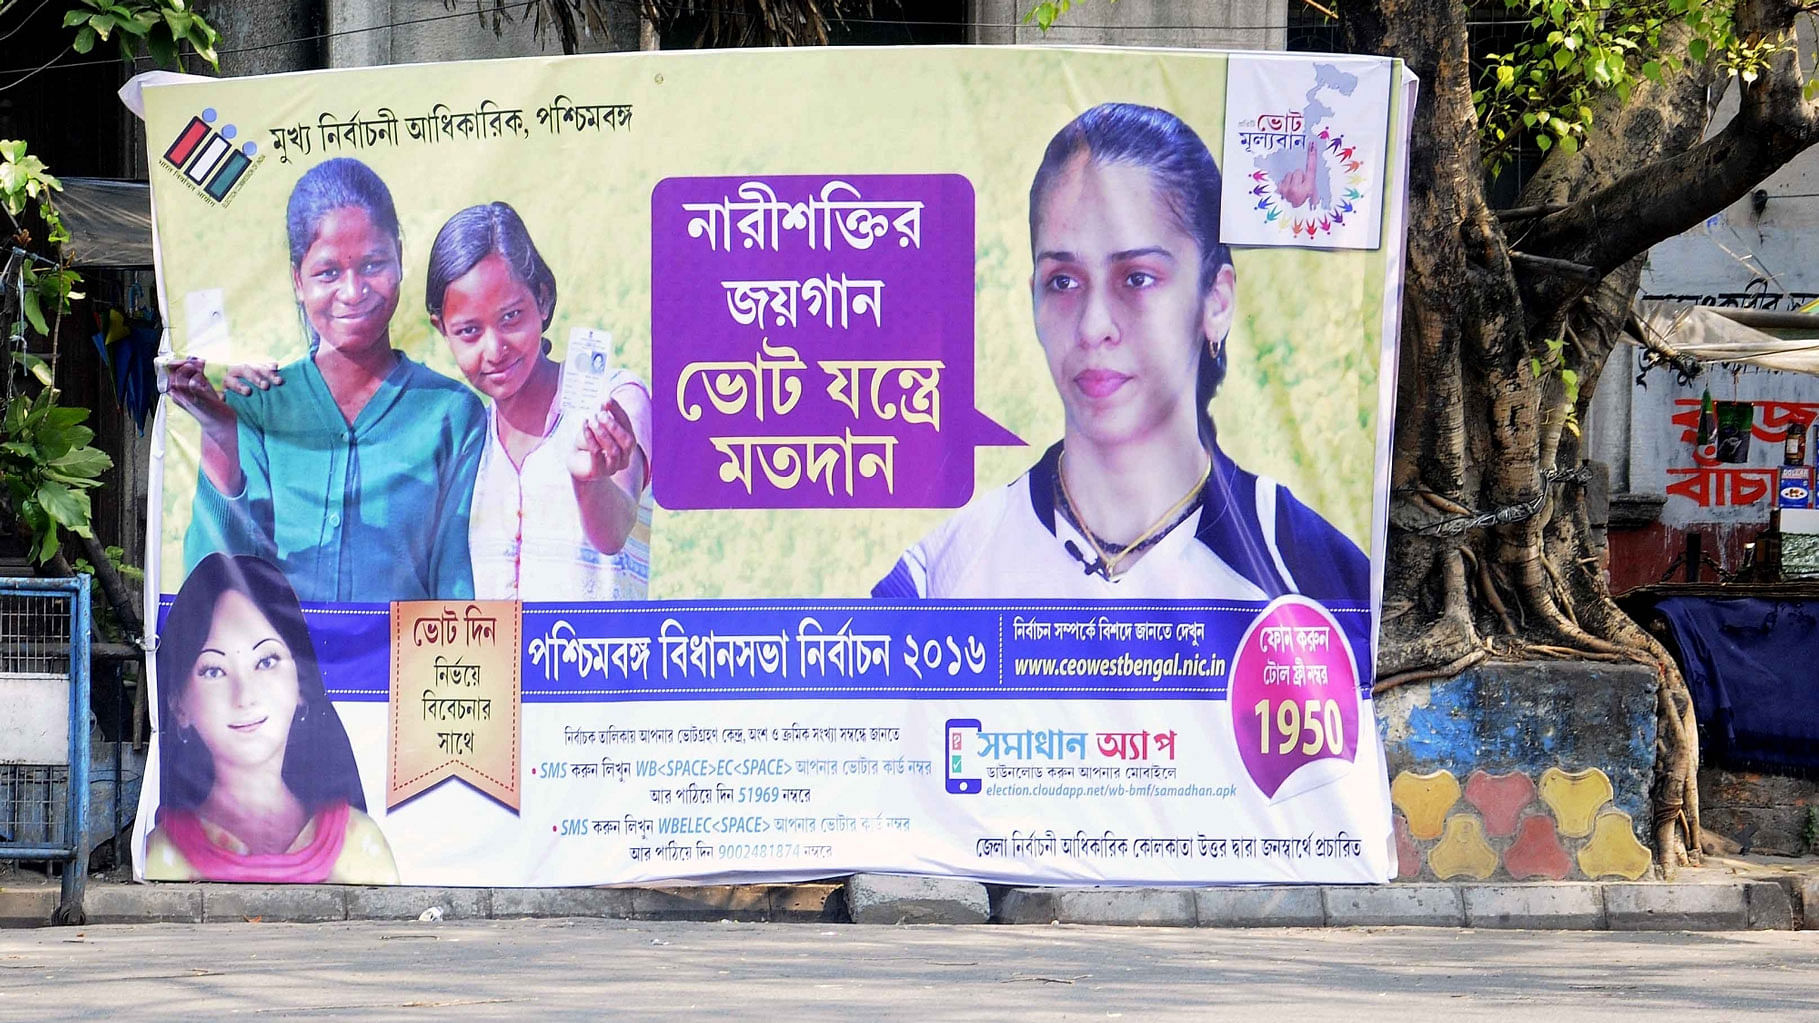  A hoarding featuring Election Commission’s brand ambassador Saina Nehwal set-up by  the election commission ahead of West Bengal Legislative Assembly polls in Kolkata.(Photo:IANS)